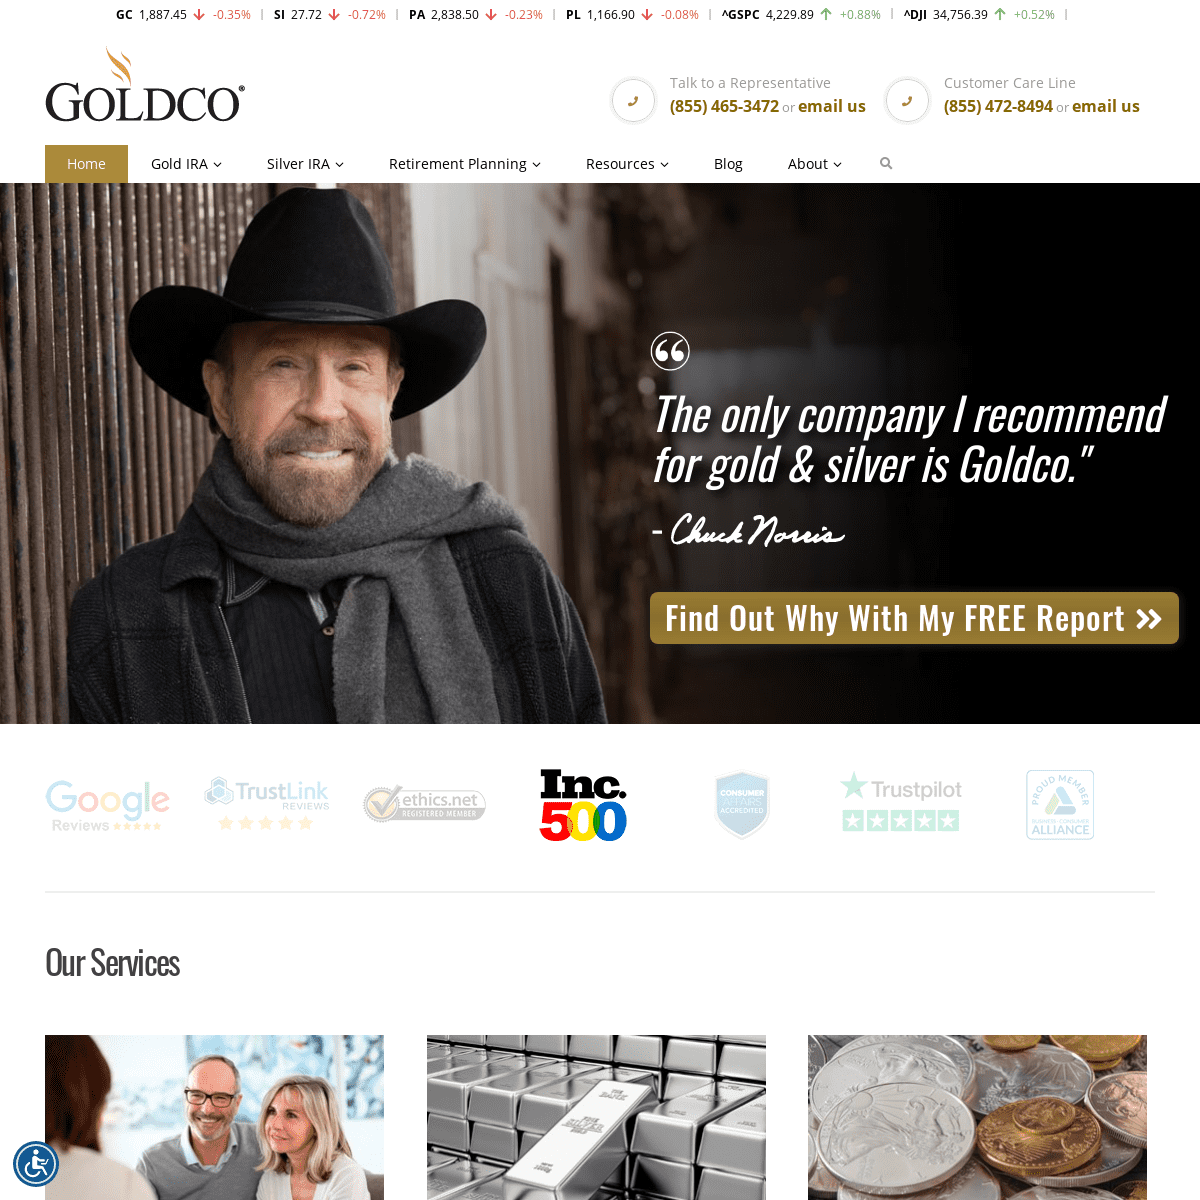 A complete backup of https://goldco.com